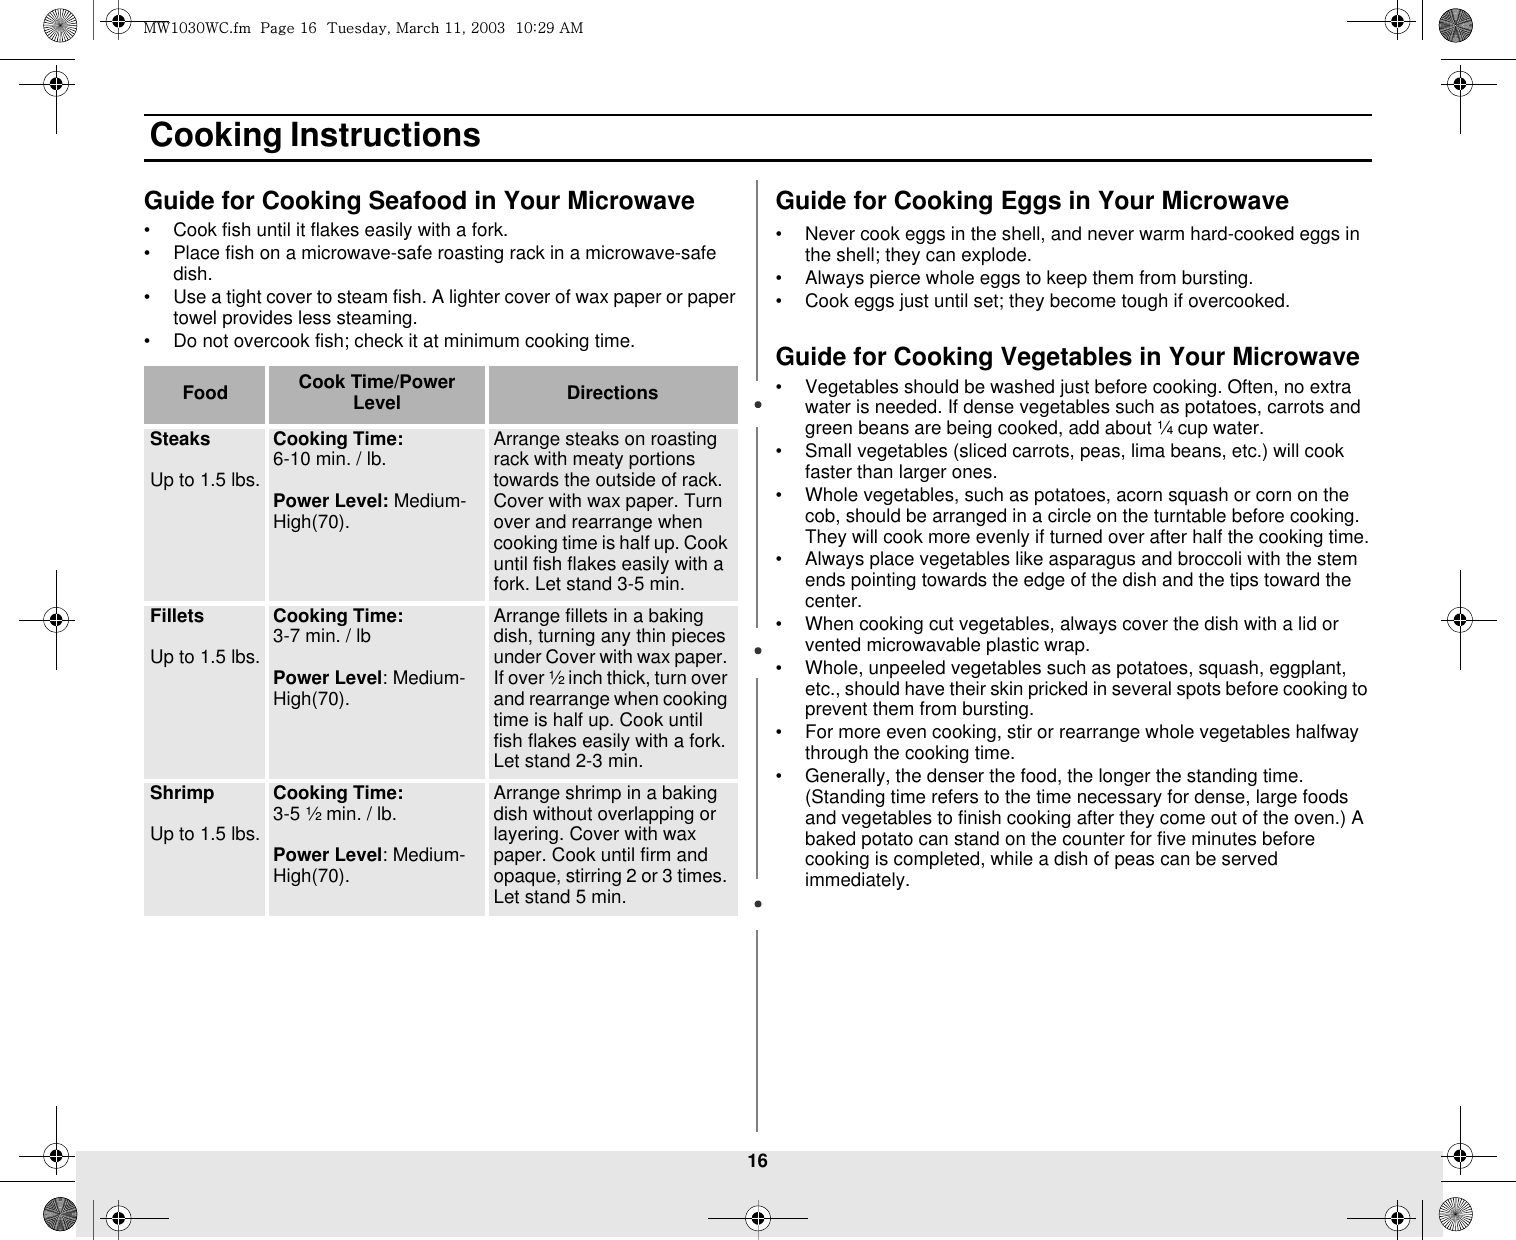 16 Cooking InstructionsGuide for Cooking Seafood in Your Microwave• Cook fish until it flakes easily with a fork.• Place fish on a microwave-safe roasting rack in a microwave-safe dish.• Use a tight cover to steam fish. A lighter cover of wax paper or paper towel provides less steaming.• Do not overcook fish; check it at minimum cooking time.Guide for Cooking Eggs in Your Microwave• Never cook eggs in the shell, and never warm hard-cooked eggs in the shell; they can explode.• Always pierce whole eggs to keep them from bursting.• Cook eggs just until set; they become tough if overcooked.Guide for Cooking Vegetables in Your Microwave• Vegetables should be washed just before cooking. Often, no extra water is needed. If dense vegetables such as potatoes, carrots and green beans are being cooked, add about ¼ cup water.• Small vegetables (sliced carrots, peas, lima beans, etc.) will cook faster than larger ones.• Whole vegetables, such as potatoes, acorn squash or corn on the cob, should be arranged in a circle on the turntable before cooking. They will cook more evenly if turned over after half the cooking time.• Always place vegetables like asparagus and broccoli with the stem ends pointing towards the edge of the dish and the tips toward the center.• When cooking cut vegetables, always cover the dish with a lid or vented microwavable plastic wrap.• Whole, unpeeled vegetables such as potatoes, squash, eggplant, etc., should have their skin pricked in several spots before cooking to prevent them from bursting.• For more even cooking, stir or rearrange whole vegetables halfway through the cooking time.• Generally, the denser the food, the longer the standing time. (Standing time refers to the time necessary for dense, large foods and vegetables to finish cooking after they come out of the oven.) A baked potato can stand on the counter for five minutes before cooking is completed, while a dish of peas can be served immediately.Food Cook Time/Power Level DirectionsSteaksUp to 1.5 lbs.Cooking Time: 6-10 min. / lb. Power Level: Medium-High(70).Arrange steaks on roasting rack with meaty portions towards the outside of rack. Cover with wax paper. Turn over and rearrange when cooking time is half up. Cook until fish flakes easily with a fork. Let stand 3-5 min. FilletsUp to 1.5 lbs.Cooking Time: 3-7 min. / lbPower Level: Medium-High(70).Arrange fillets in a baking dish, turning any thin pieces under Cover with wax paper. If over ½ inch thick, turn over and rearrange when cooking time is half up. Cook until fish flakes easily with a fork. Let stand 2-3 min.ShrimpUp to 1.5 lbs.Cooking Time: 3-5 ½ min. / lb.Power Level: Medium-High(70).Arrange shrimp in a baking dish without overlapping or layering. Cover with wax paper. Cook until firm and opaque, stirring 2 or 3 times. Let stand 5 min. t~XWZW~jUGGwGX]GG{SGtGXXSGYWWZGGXWaY`Ght